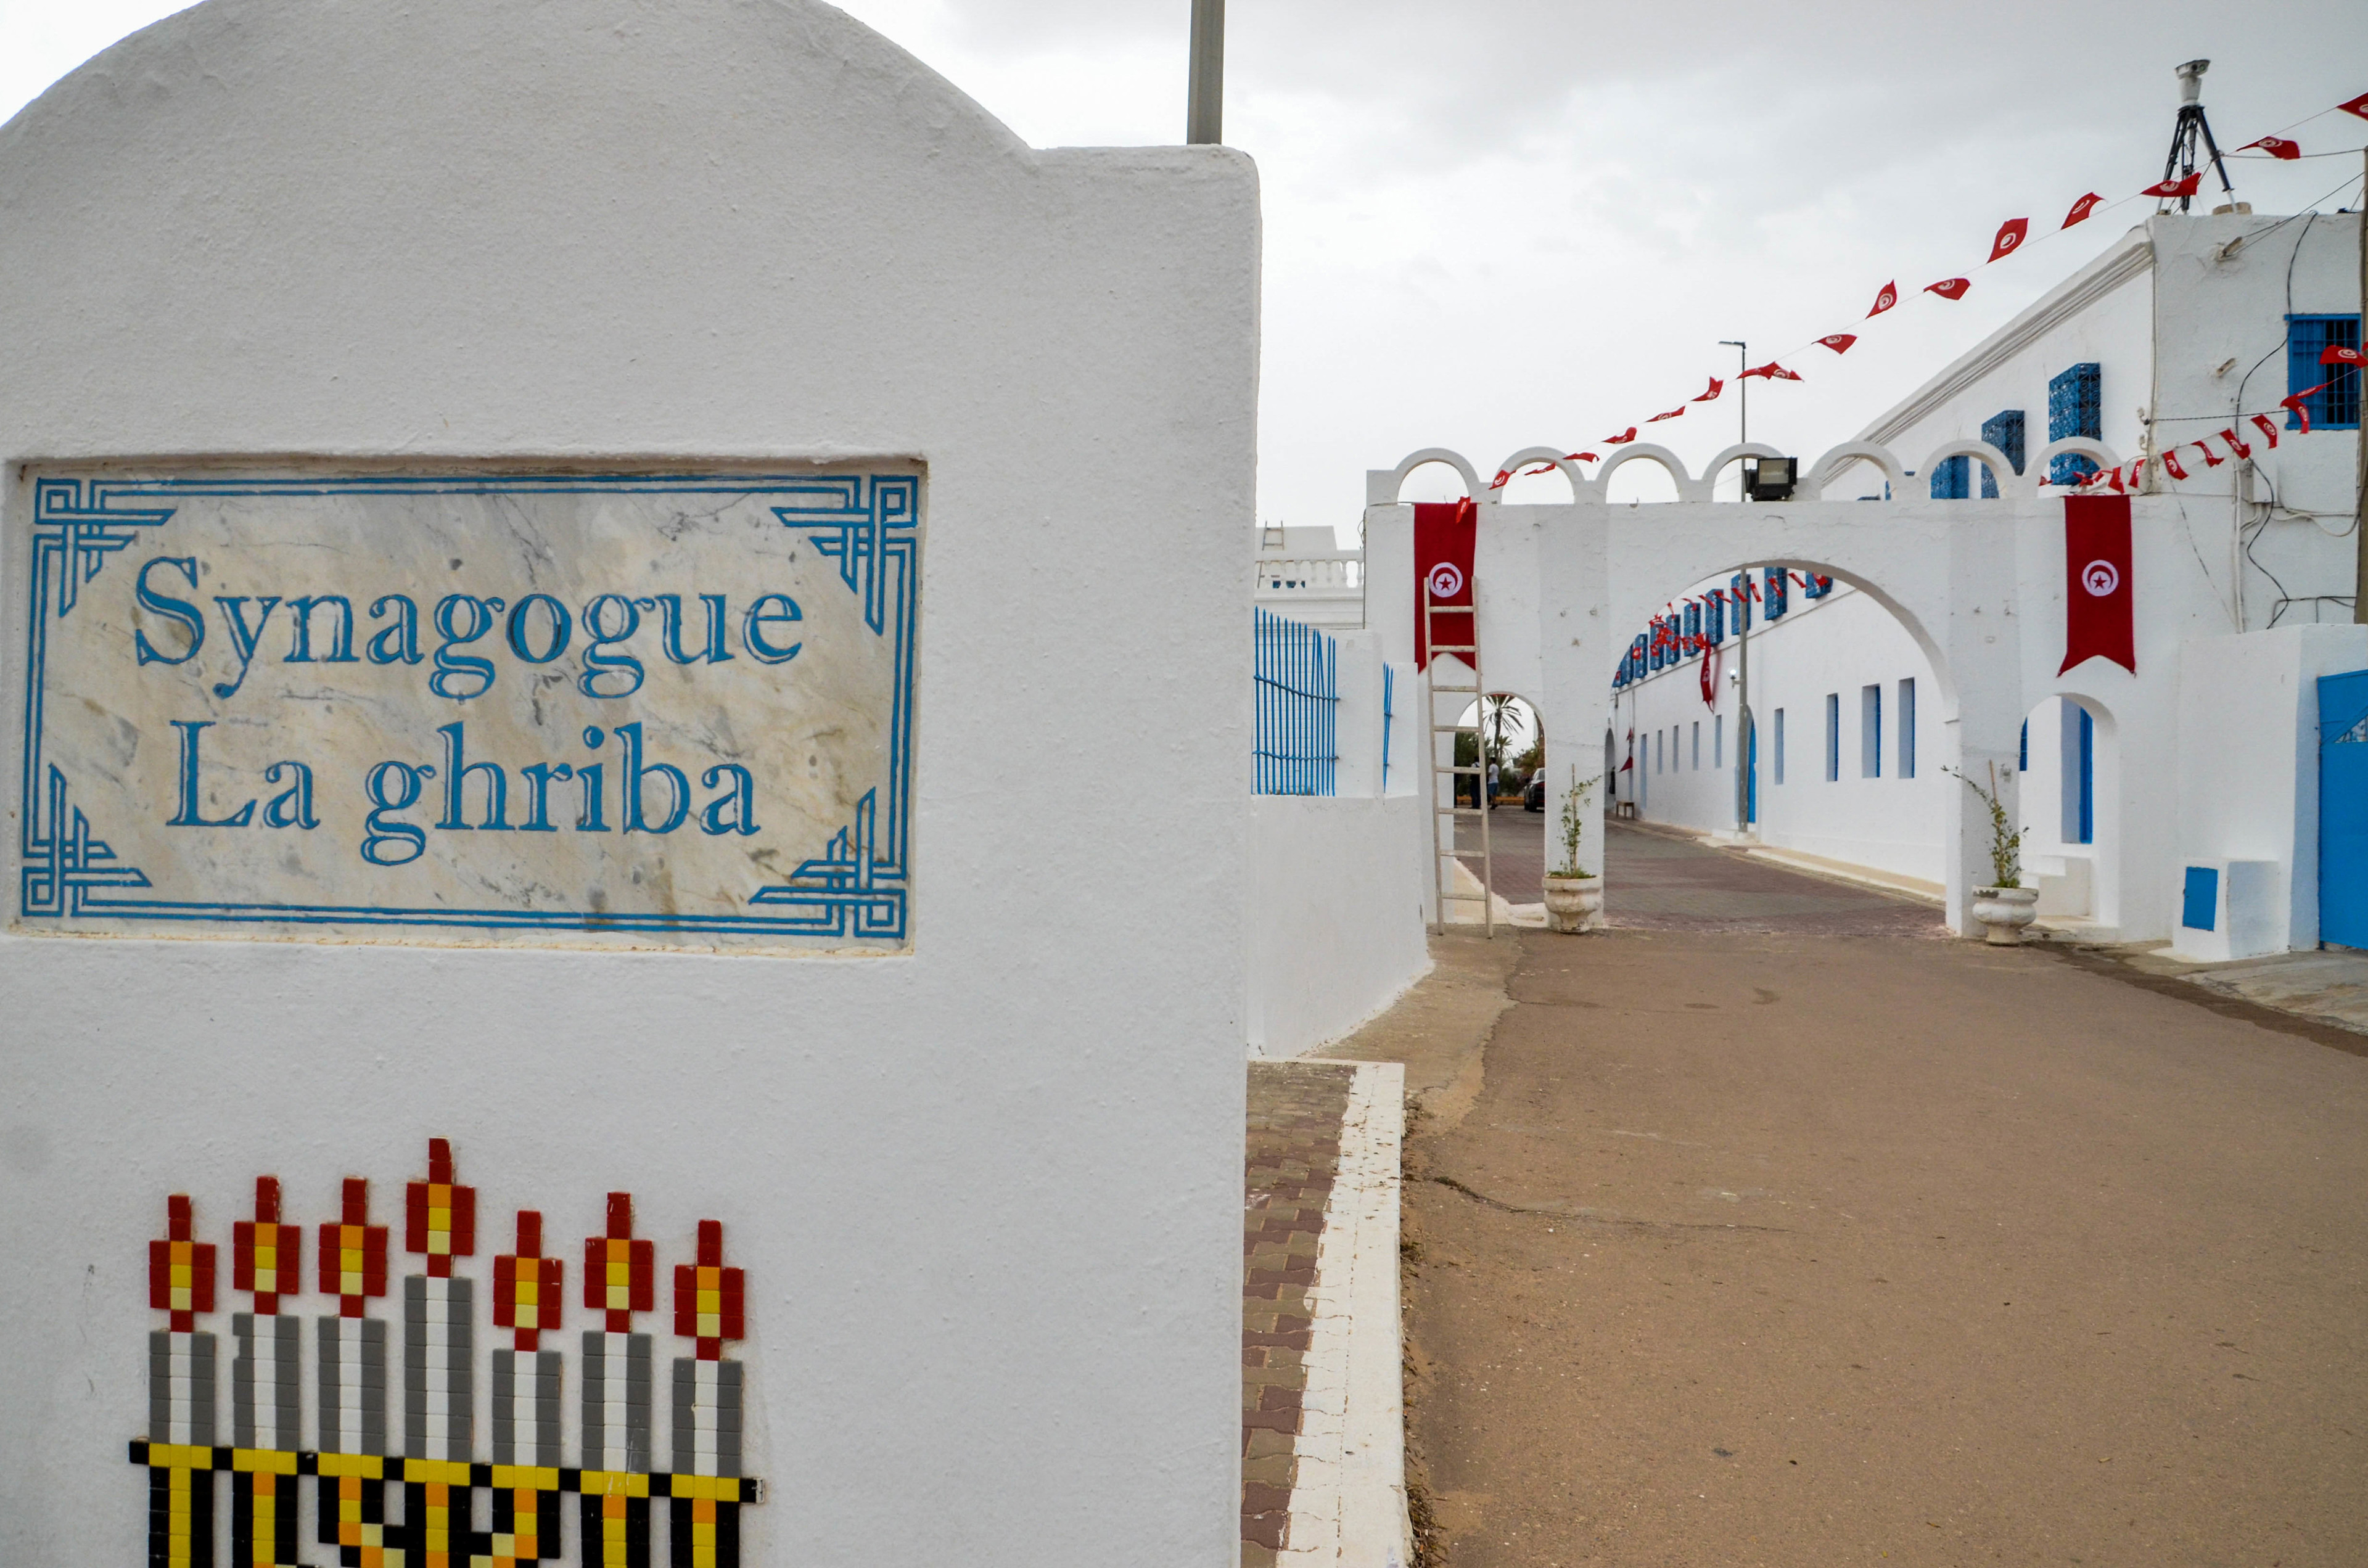 May 8, 2023: Tunis, Tunisia. 08 May 2022. The ancient synagogue ''La Ghriba'' in the Tunisian island of Djerba. The synagogue is an important feature for the Jewish community on the Tunisian island of Djerba, while also being a major site of pilgrimage